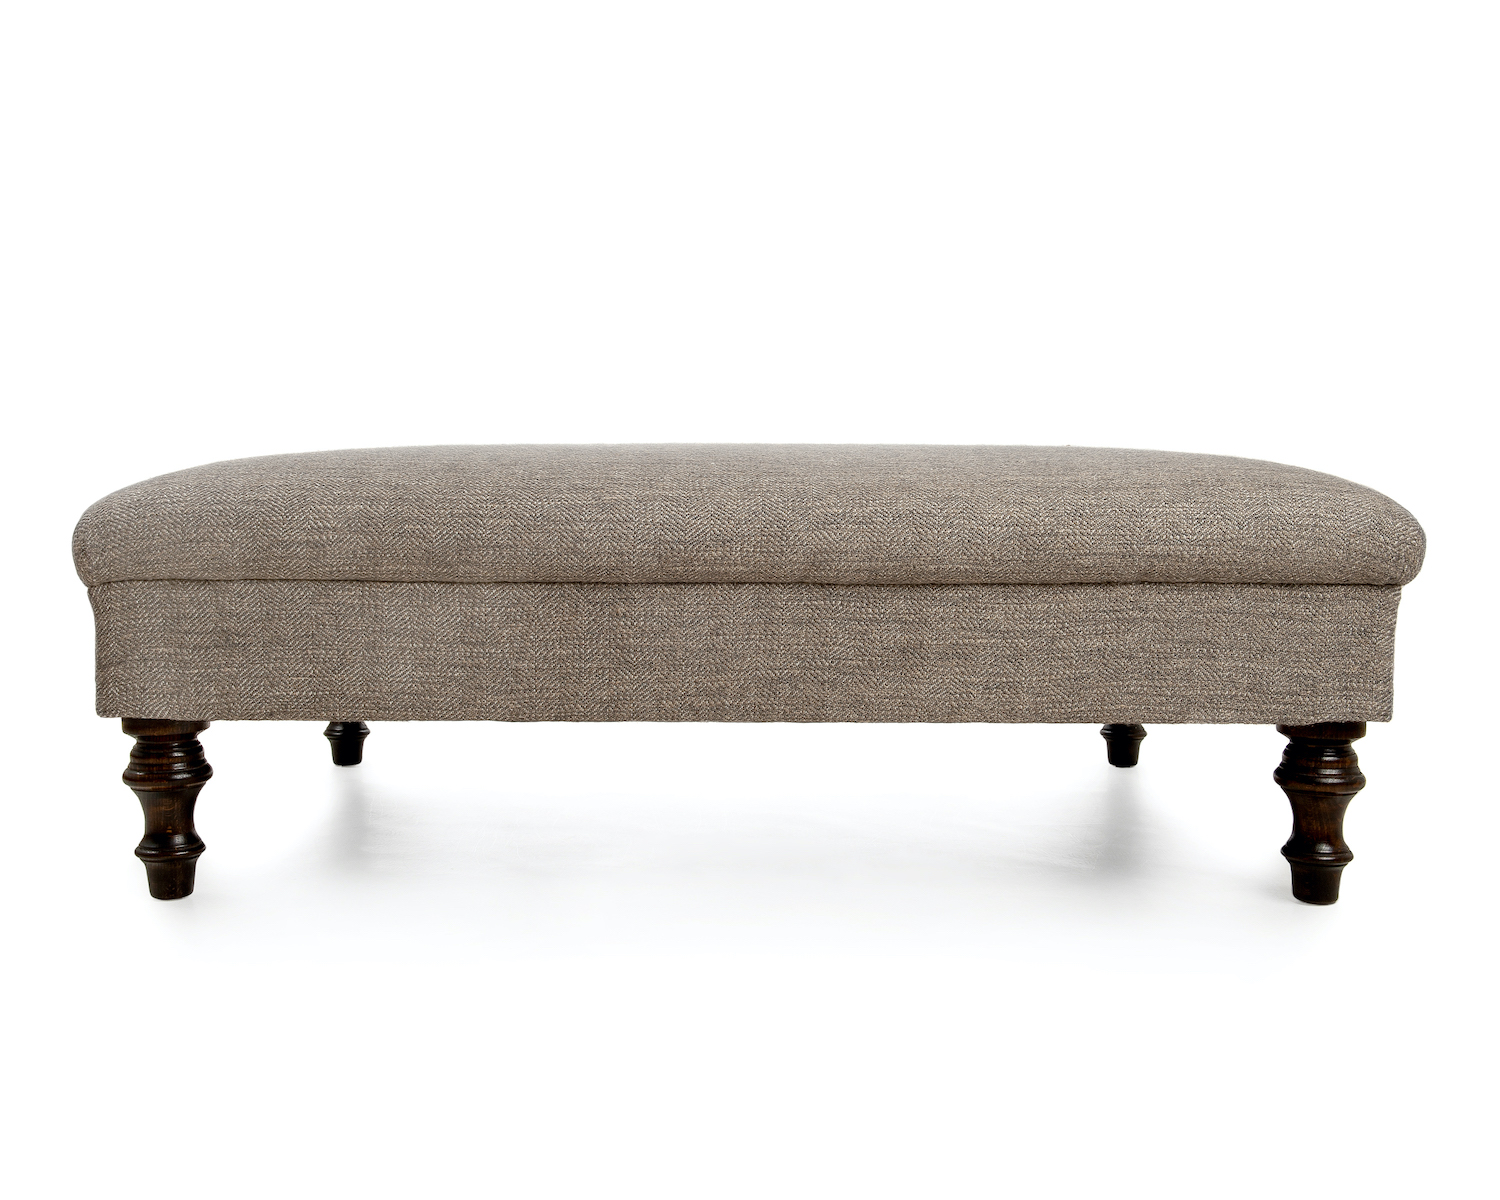 Classic and Simple Lined Roll Top Footstool with Walnut Turned Legs